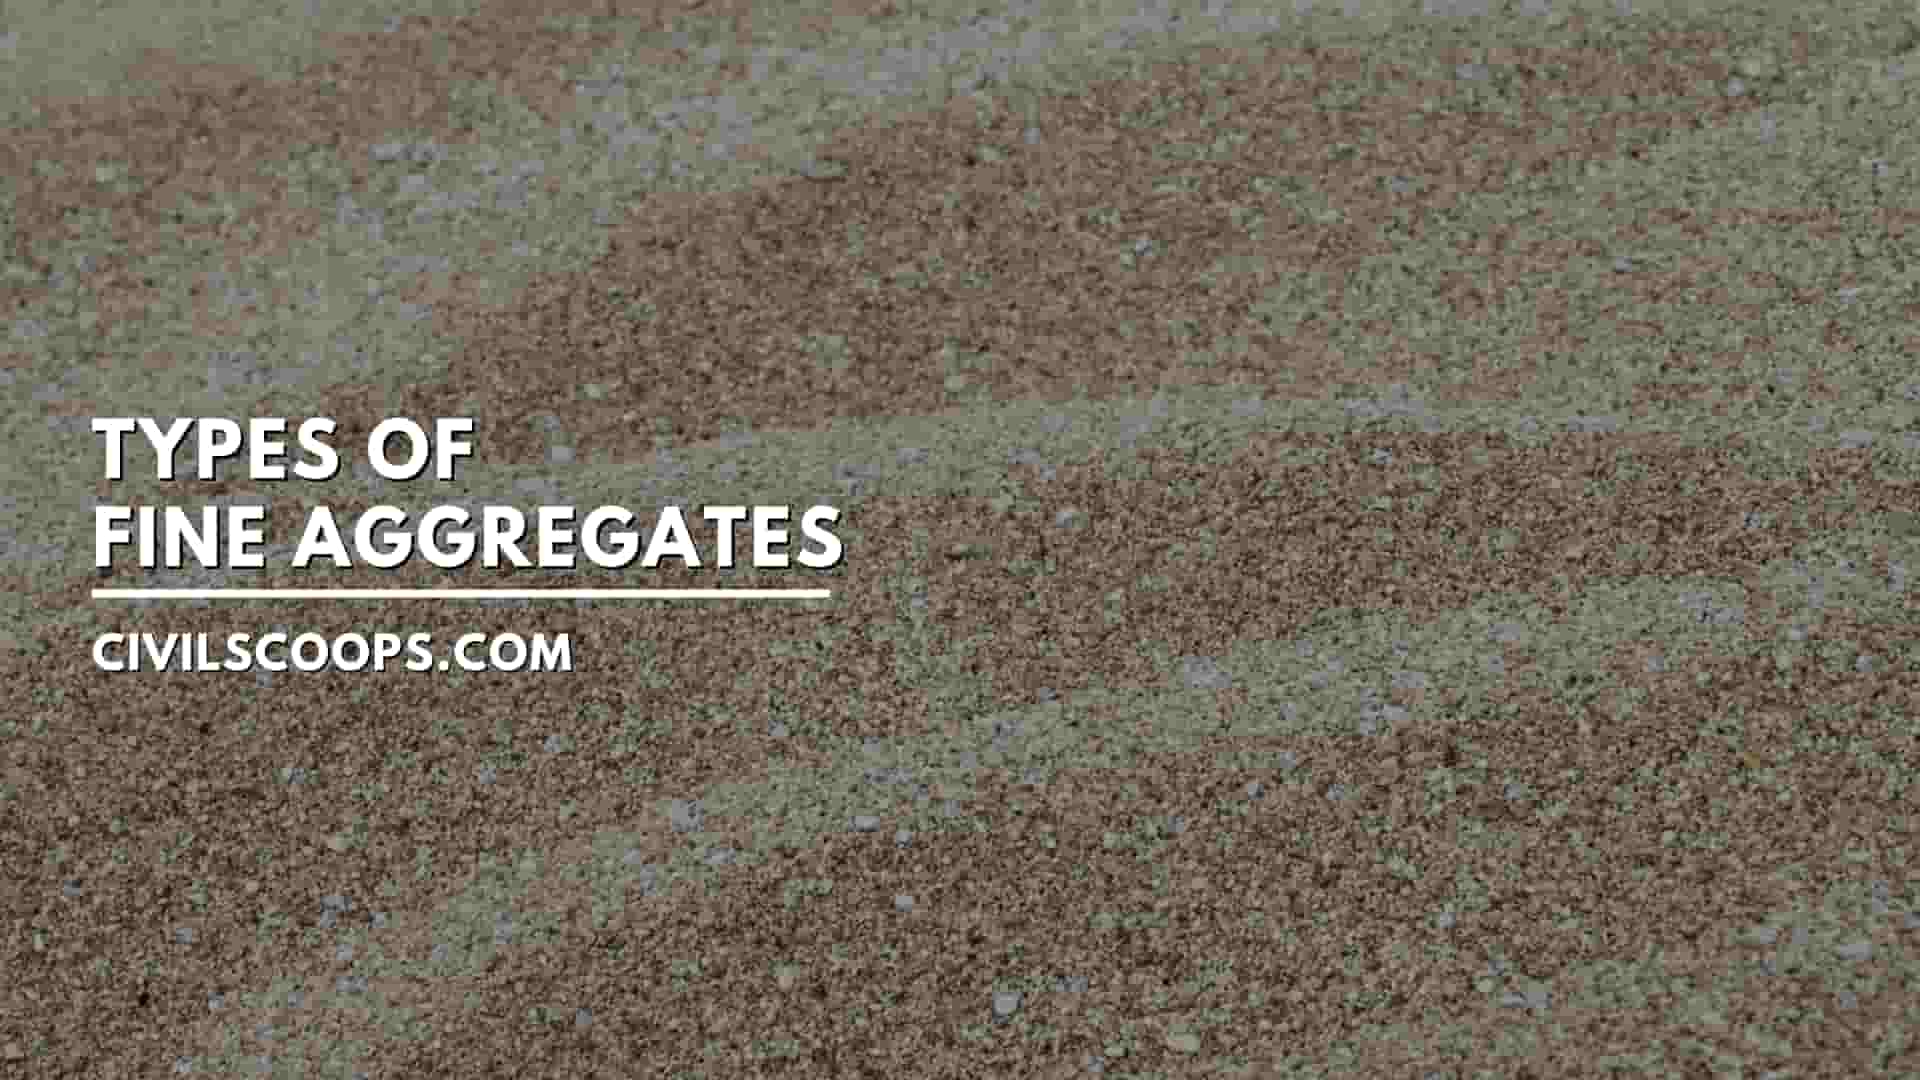 Types of Fine Aggregates